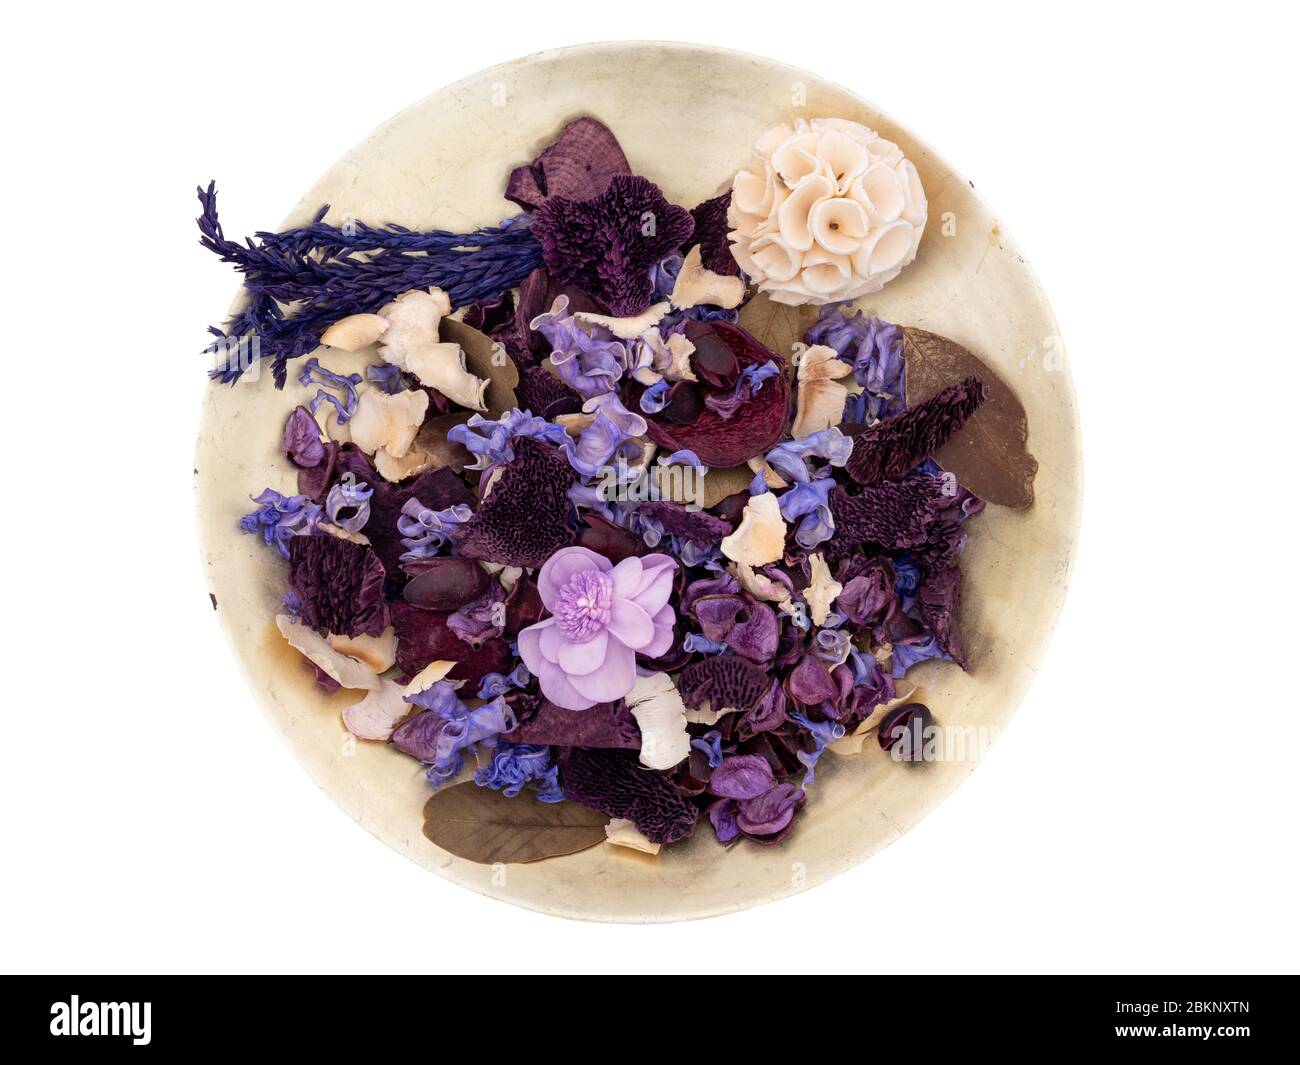 Potpourri in an old gold colour bowl, isolated on white background. Purple, mauve shades. Seen from above. Stock Photo